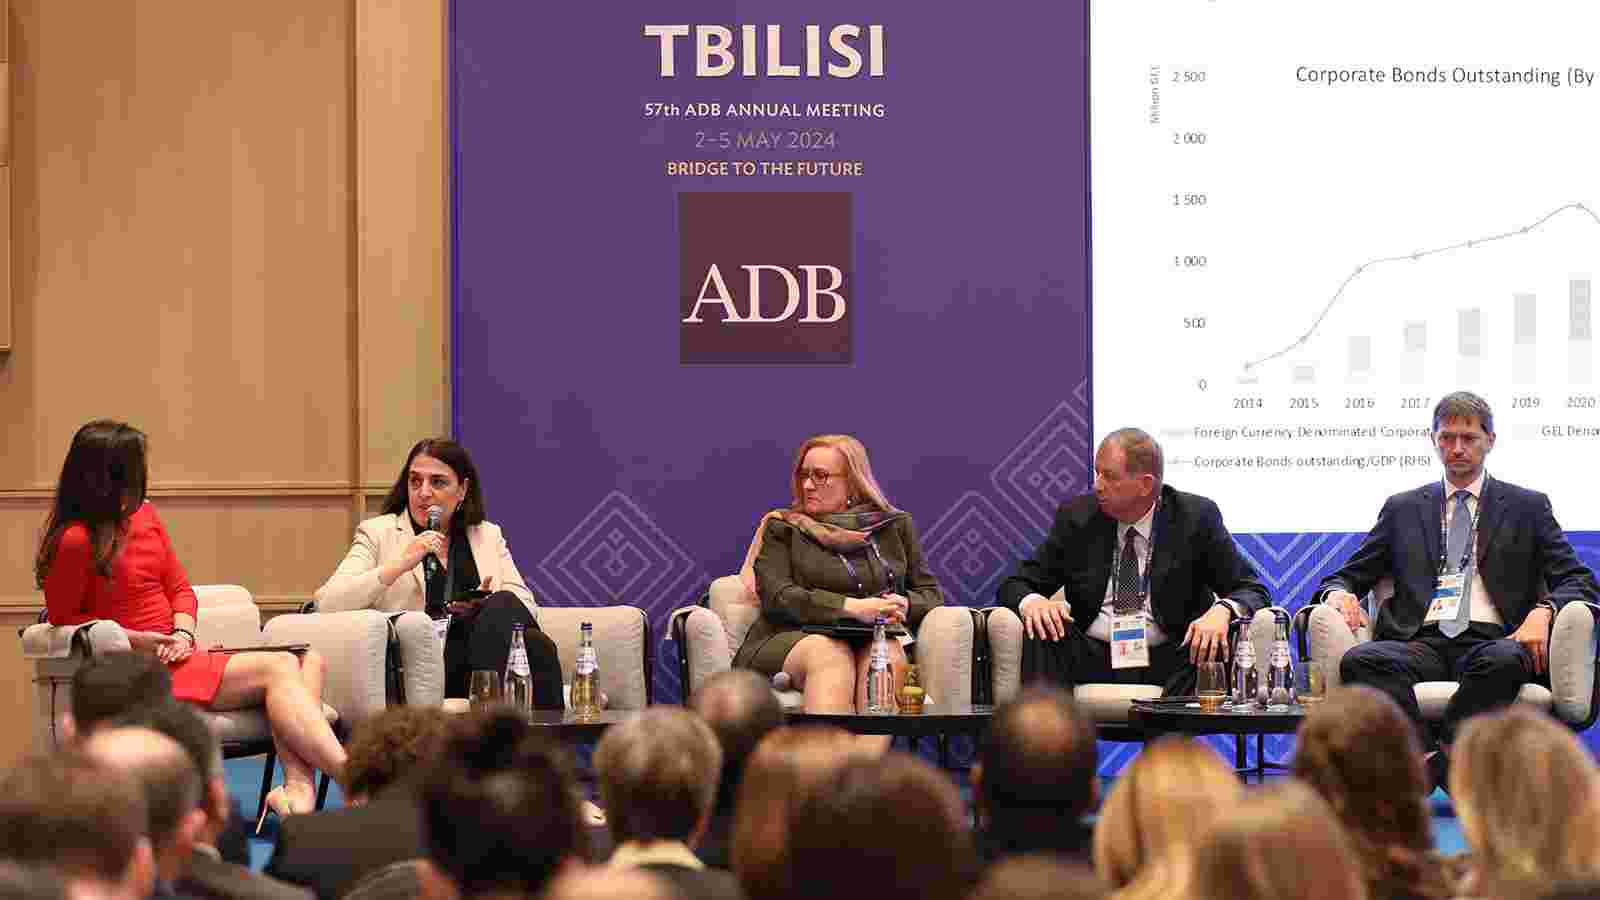 Ekaterine Mikabadze Engages in Sustainable Finance Discussion at 57th ADB Annual Meeting